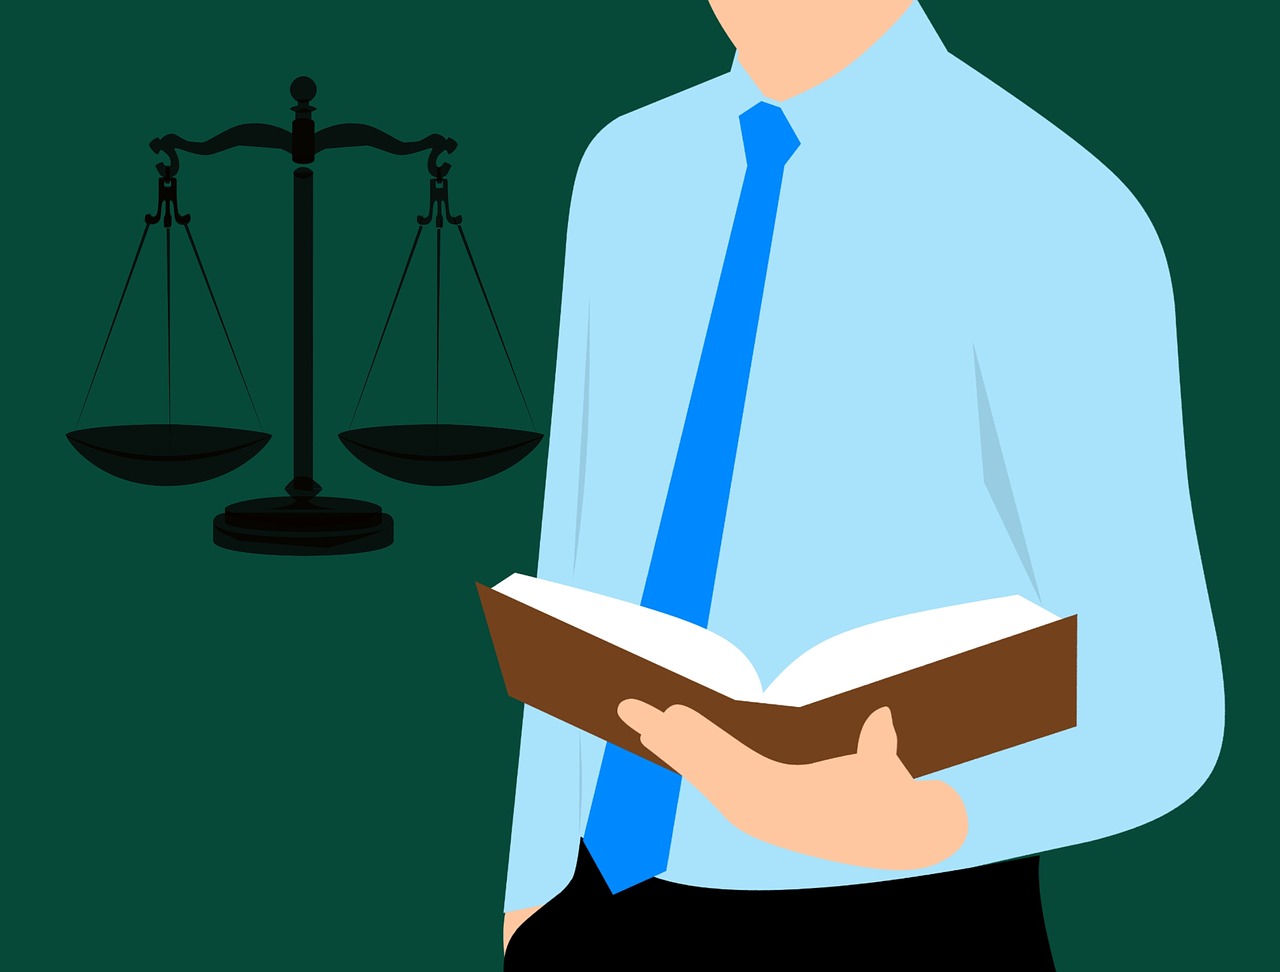 Laws clipart legal team. Lawyer law books justice